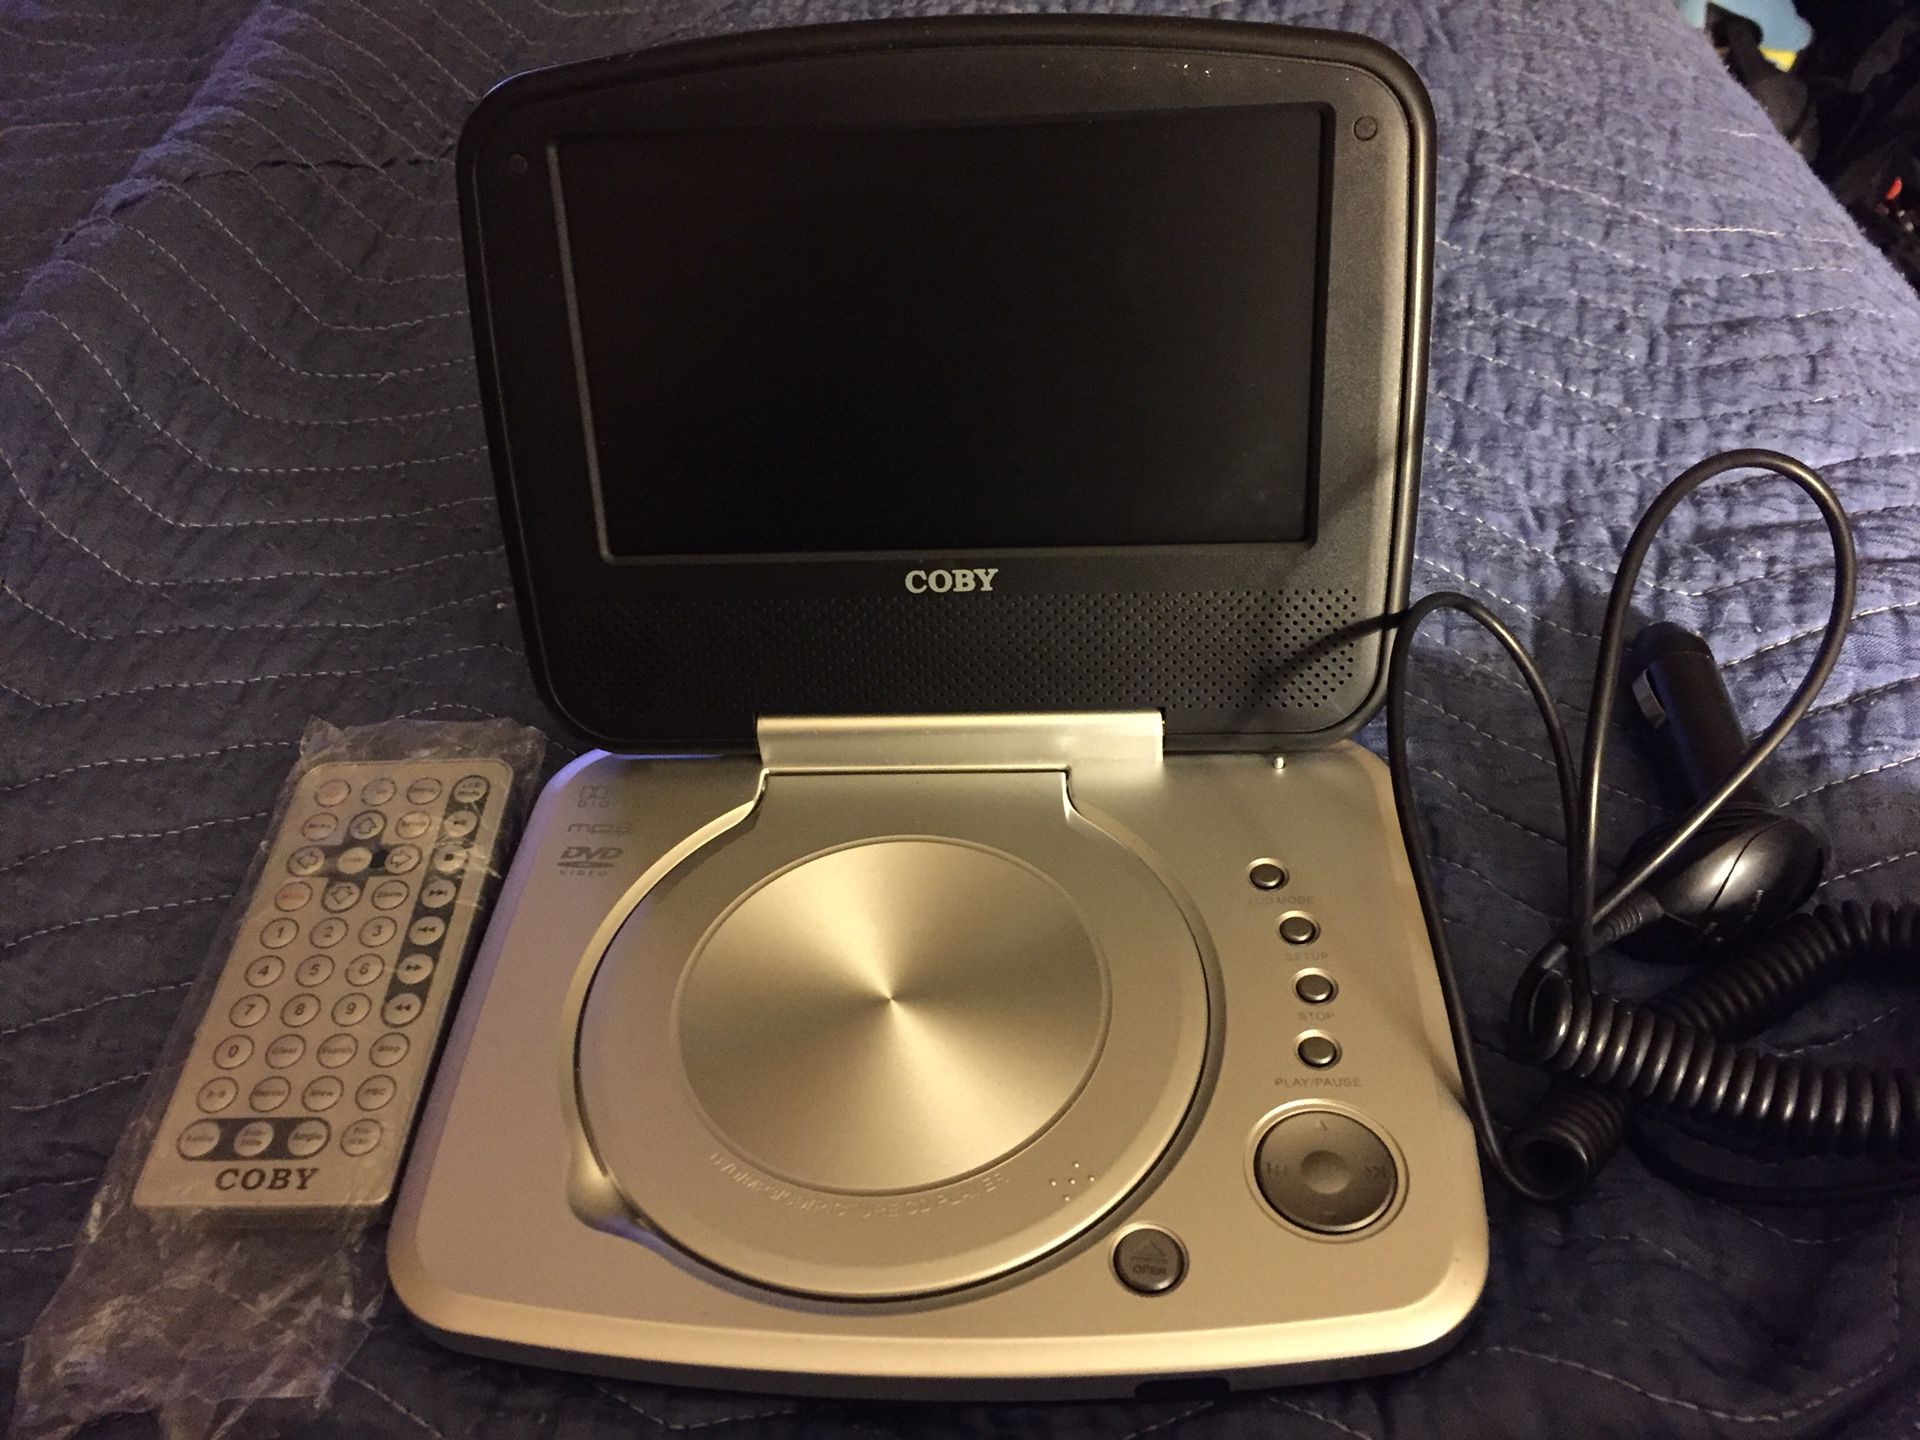 Coby DVD player with power cords